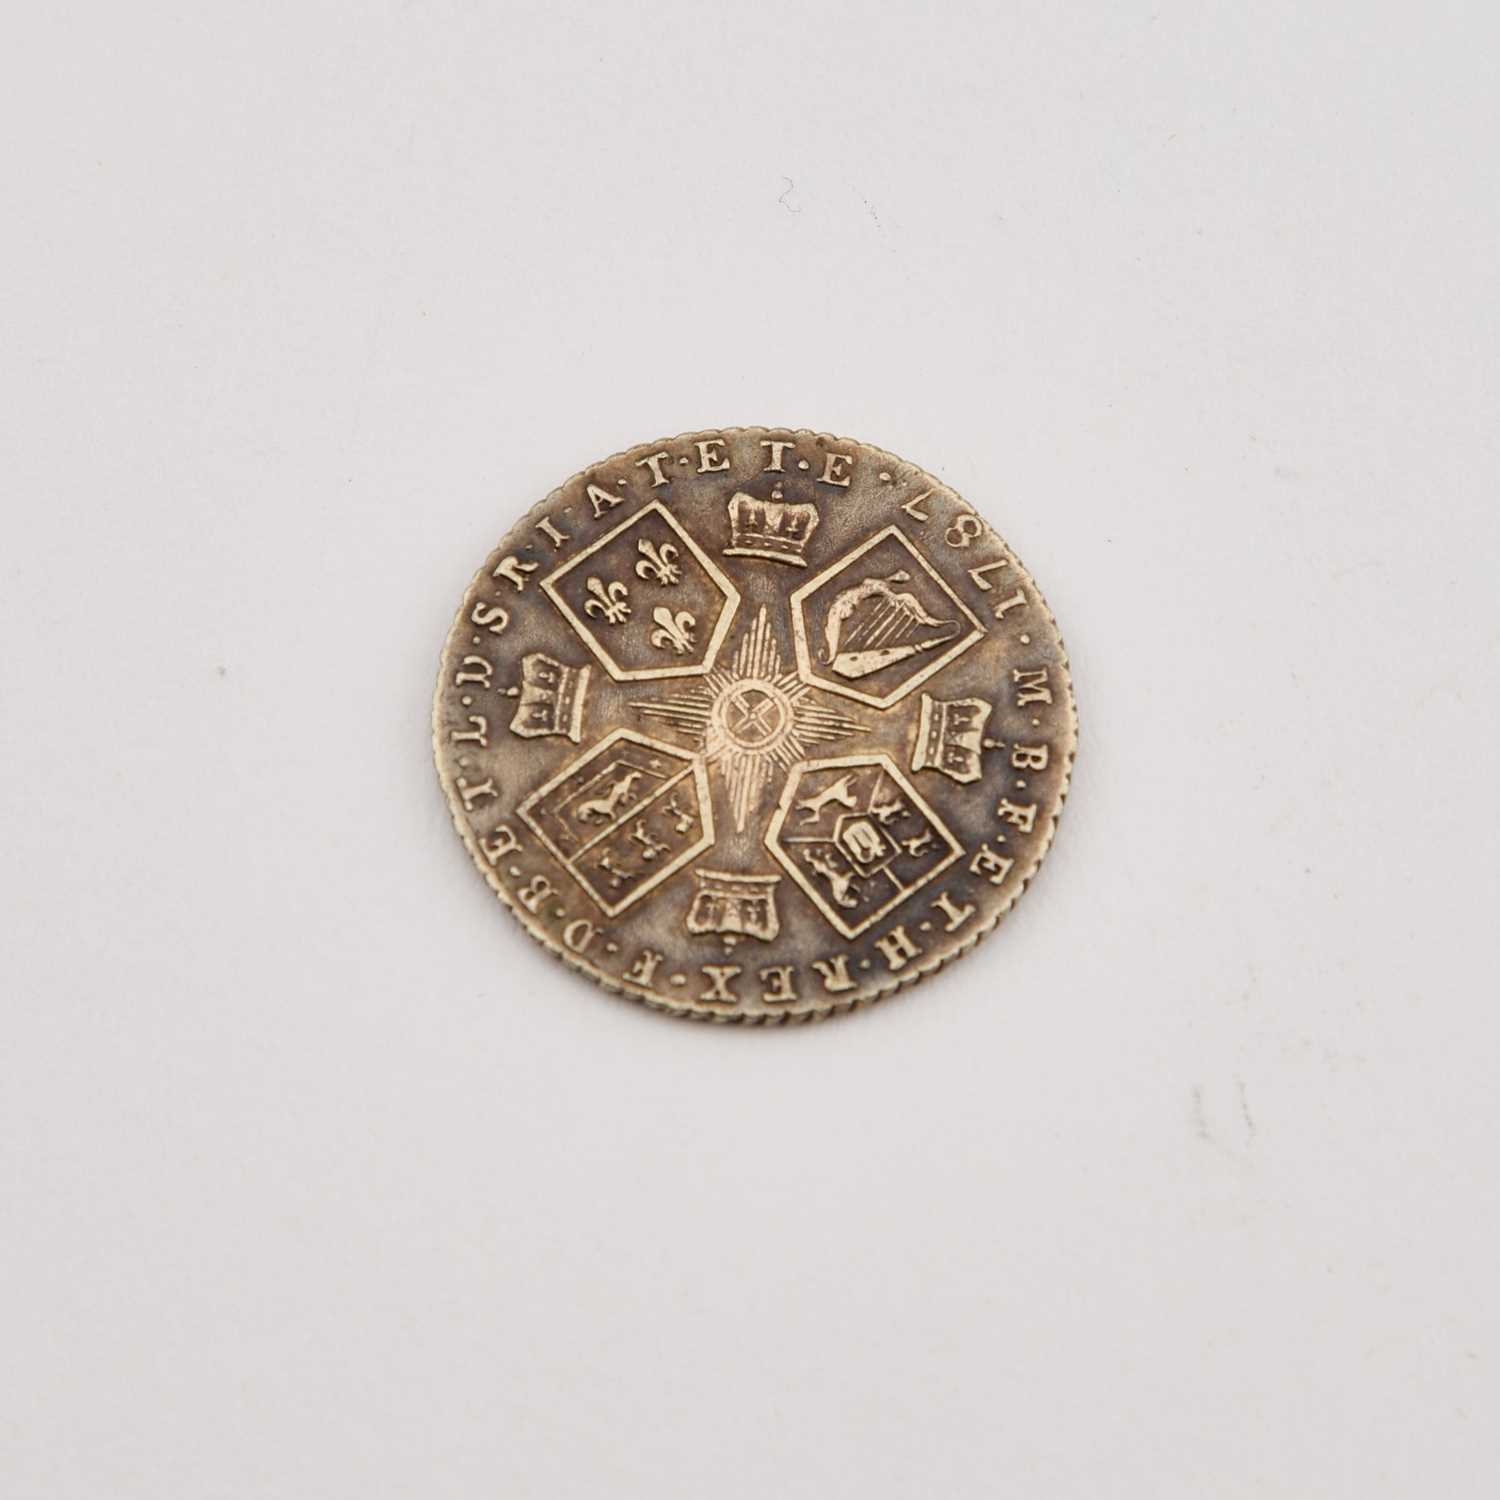 KING GEORGE III (GREAT BRITAIN) Milled silver shilling coin - Image 2 of 2